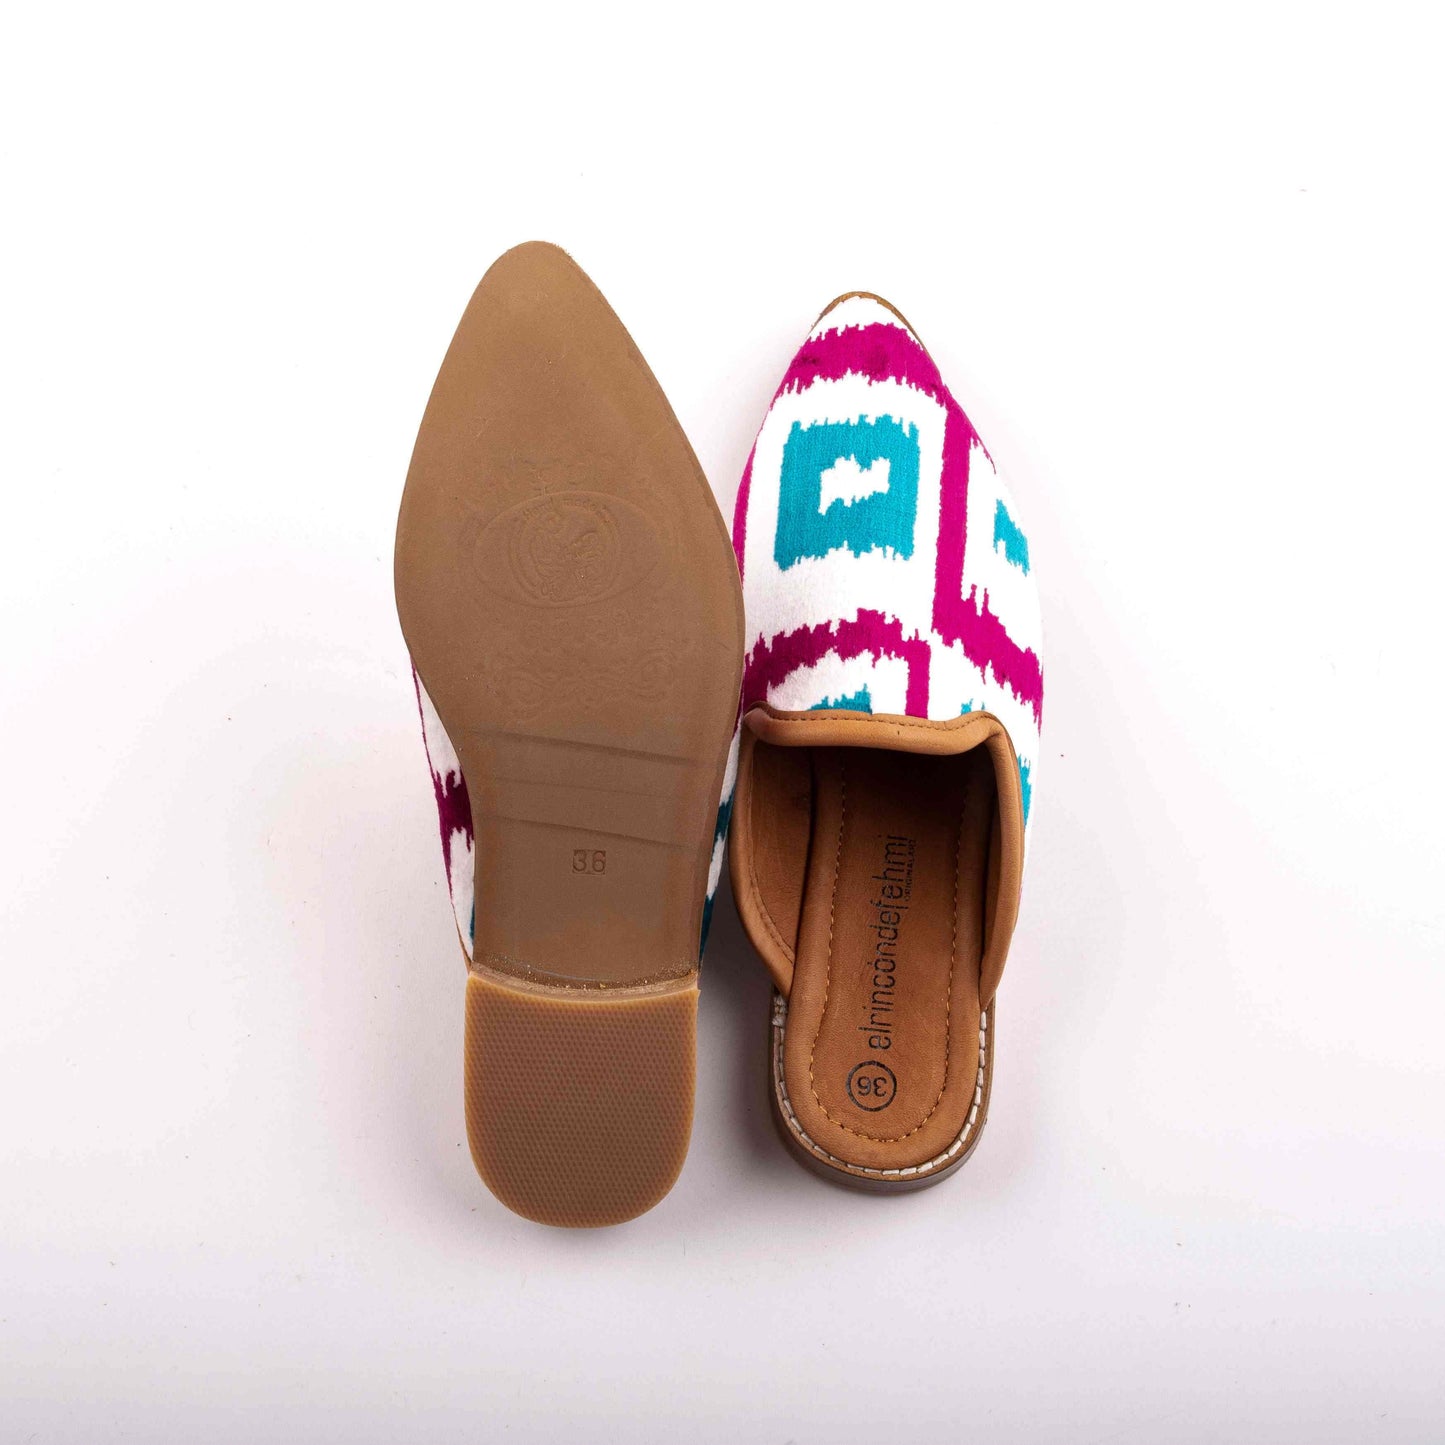 Ethnic Woman Pointed Toe Slipper Crafted From Handmade Velvet and Real Leather Size 5.5  Base Width: 7,5 cm - Base Length: 25.5 cm - Heel:1.5 cm